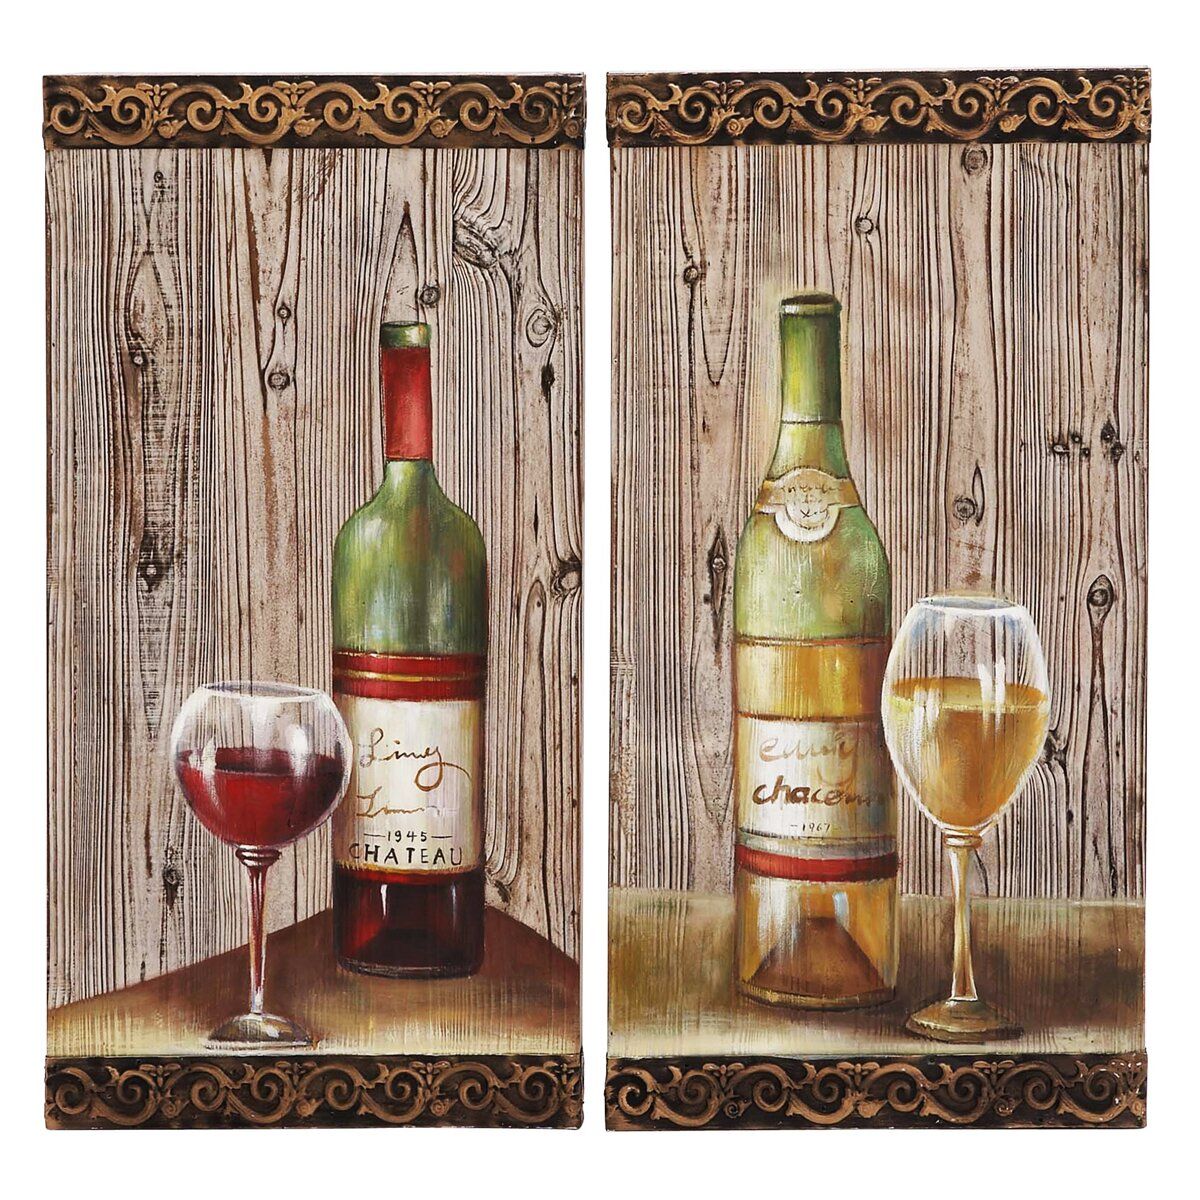 Urban Designs 2 Piece Le Chateu Wine Bottles Wood Wall Decor Set | Wayfair With Regard To Wine Wall Art (View 6 of 15)